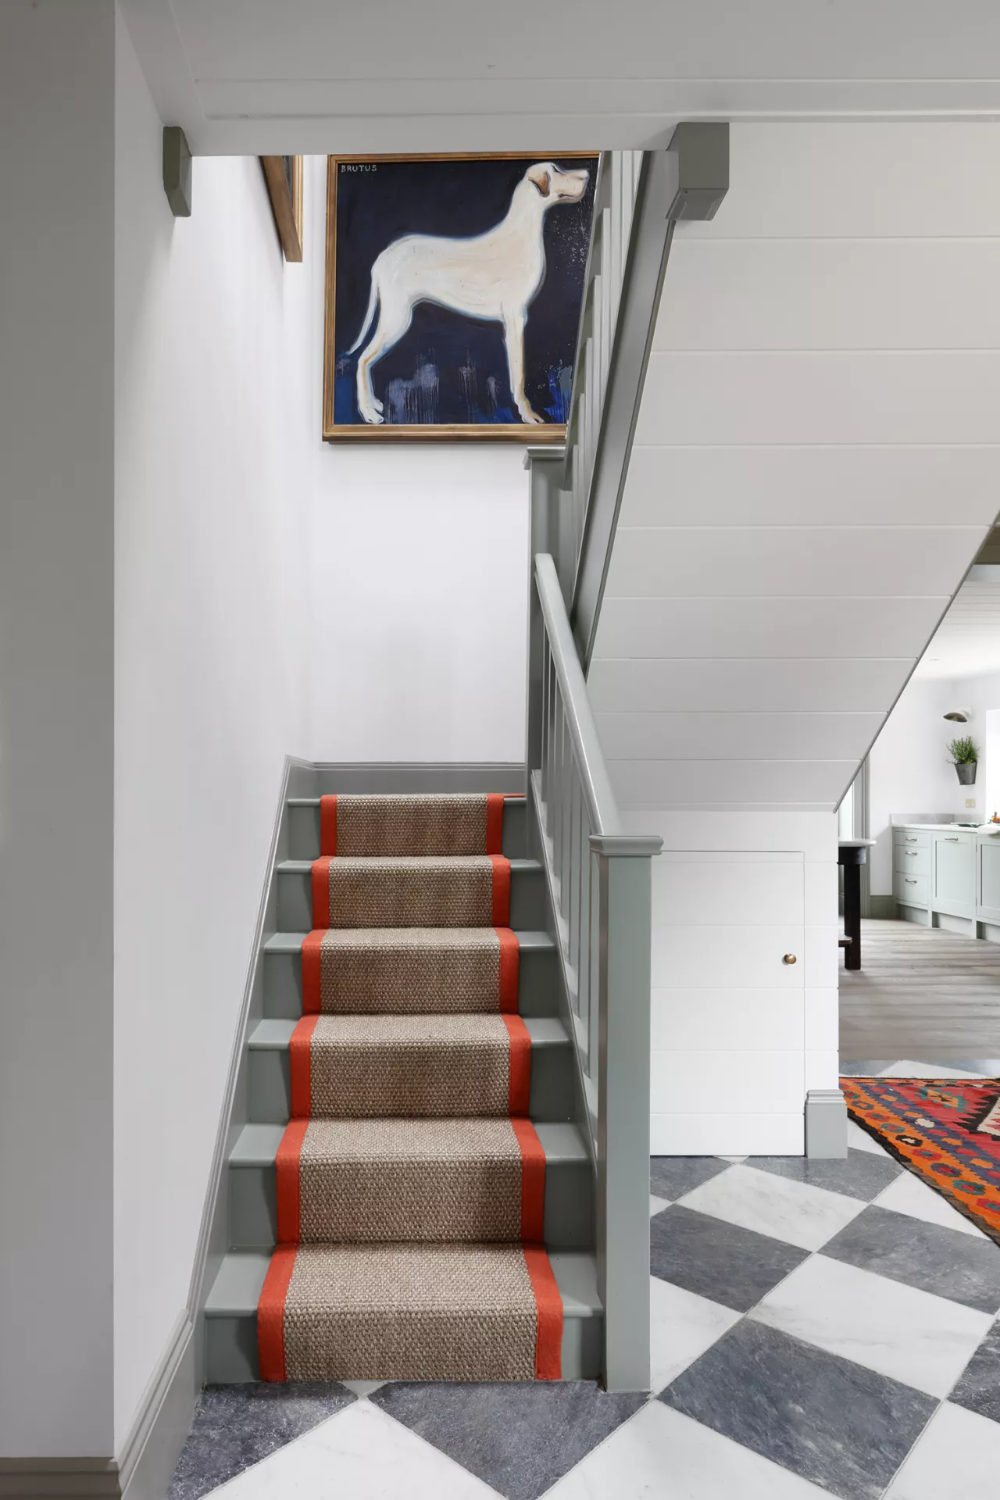 Creative Hallway Runner Ideas to Amp Up
Your Home Decor